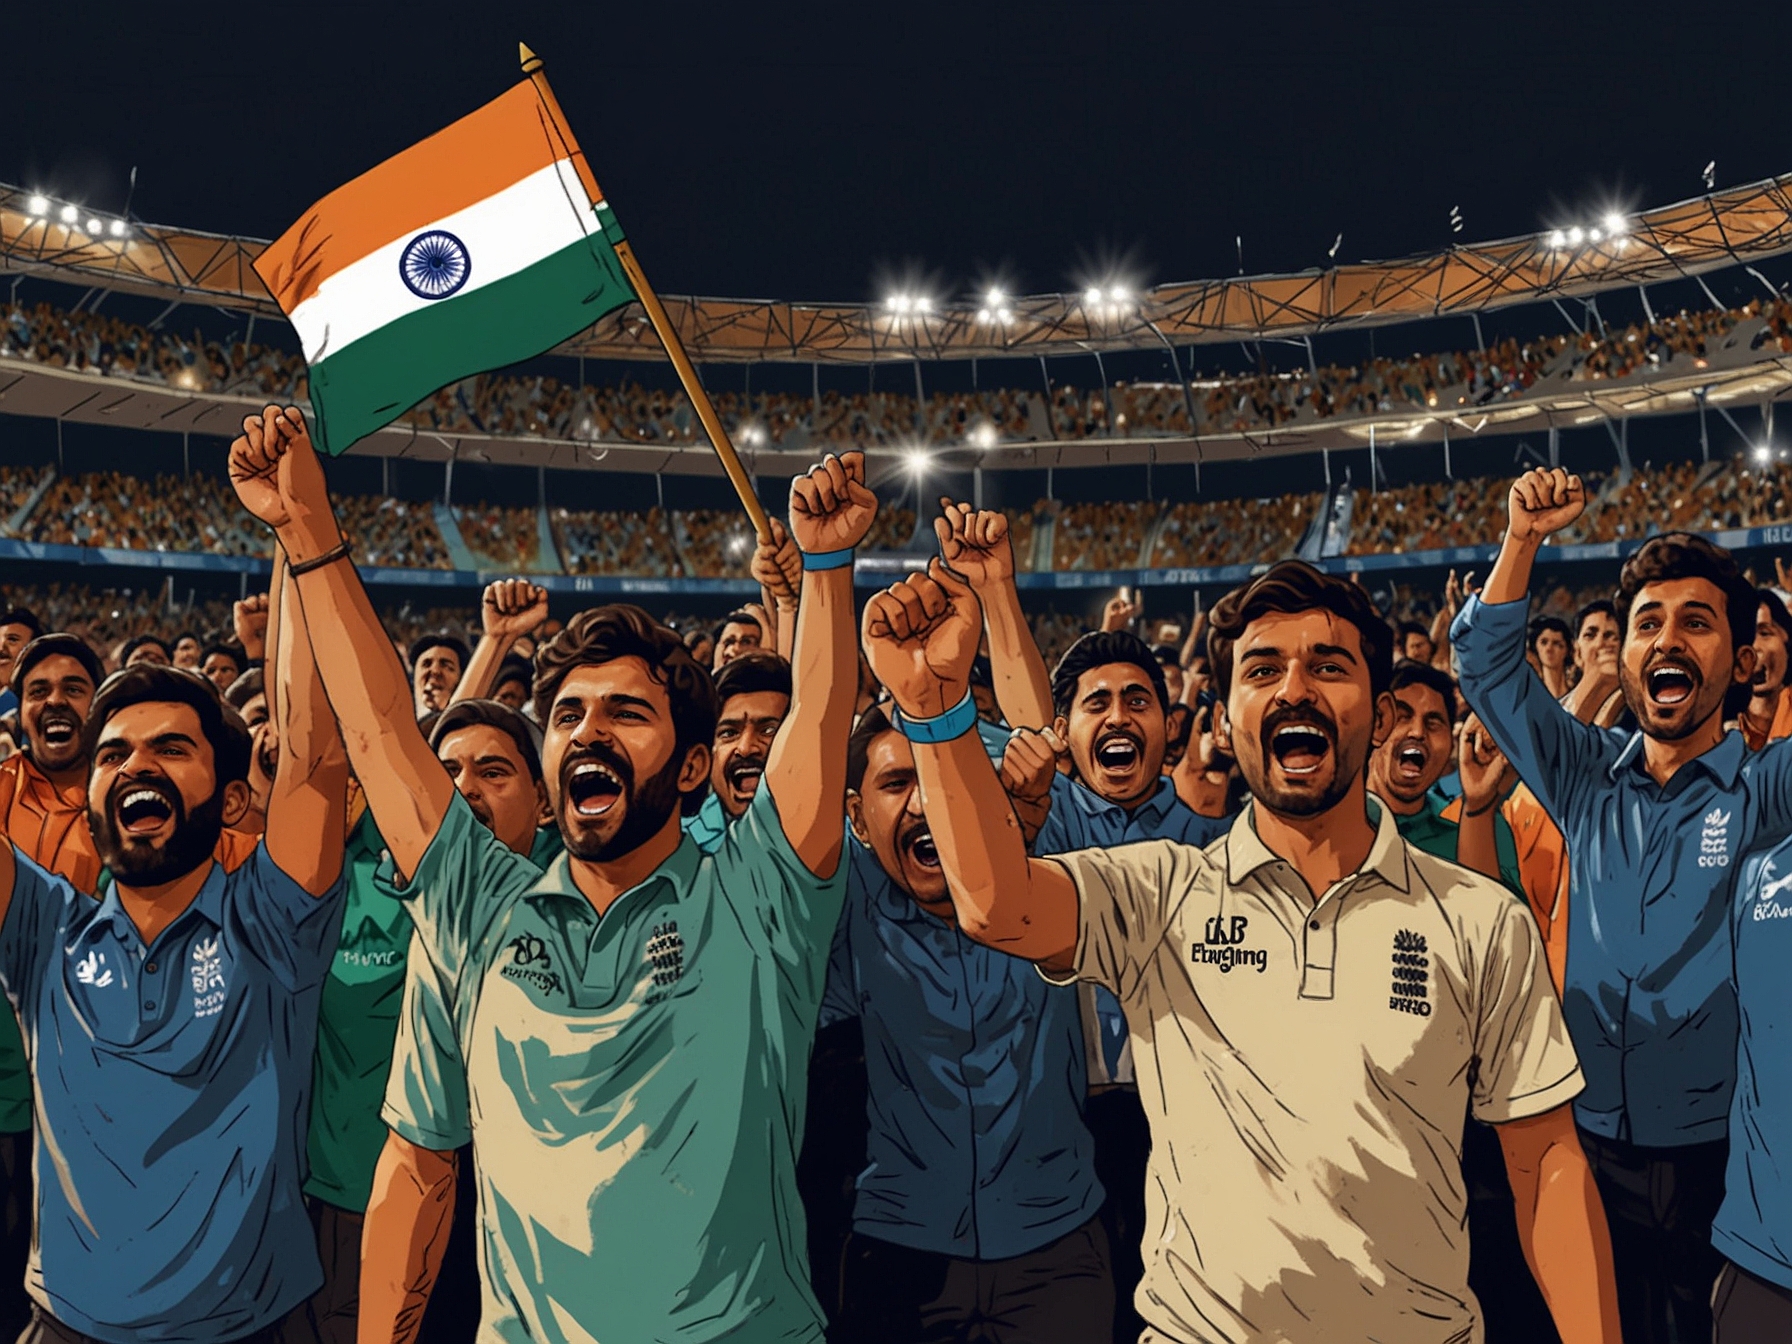 An illustration showing fans cheering for India and England cricket teams, capturing the high-energy atmosphere expected during their T20 World Cup 2024 match.